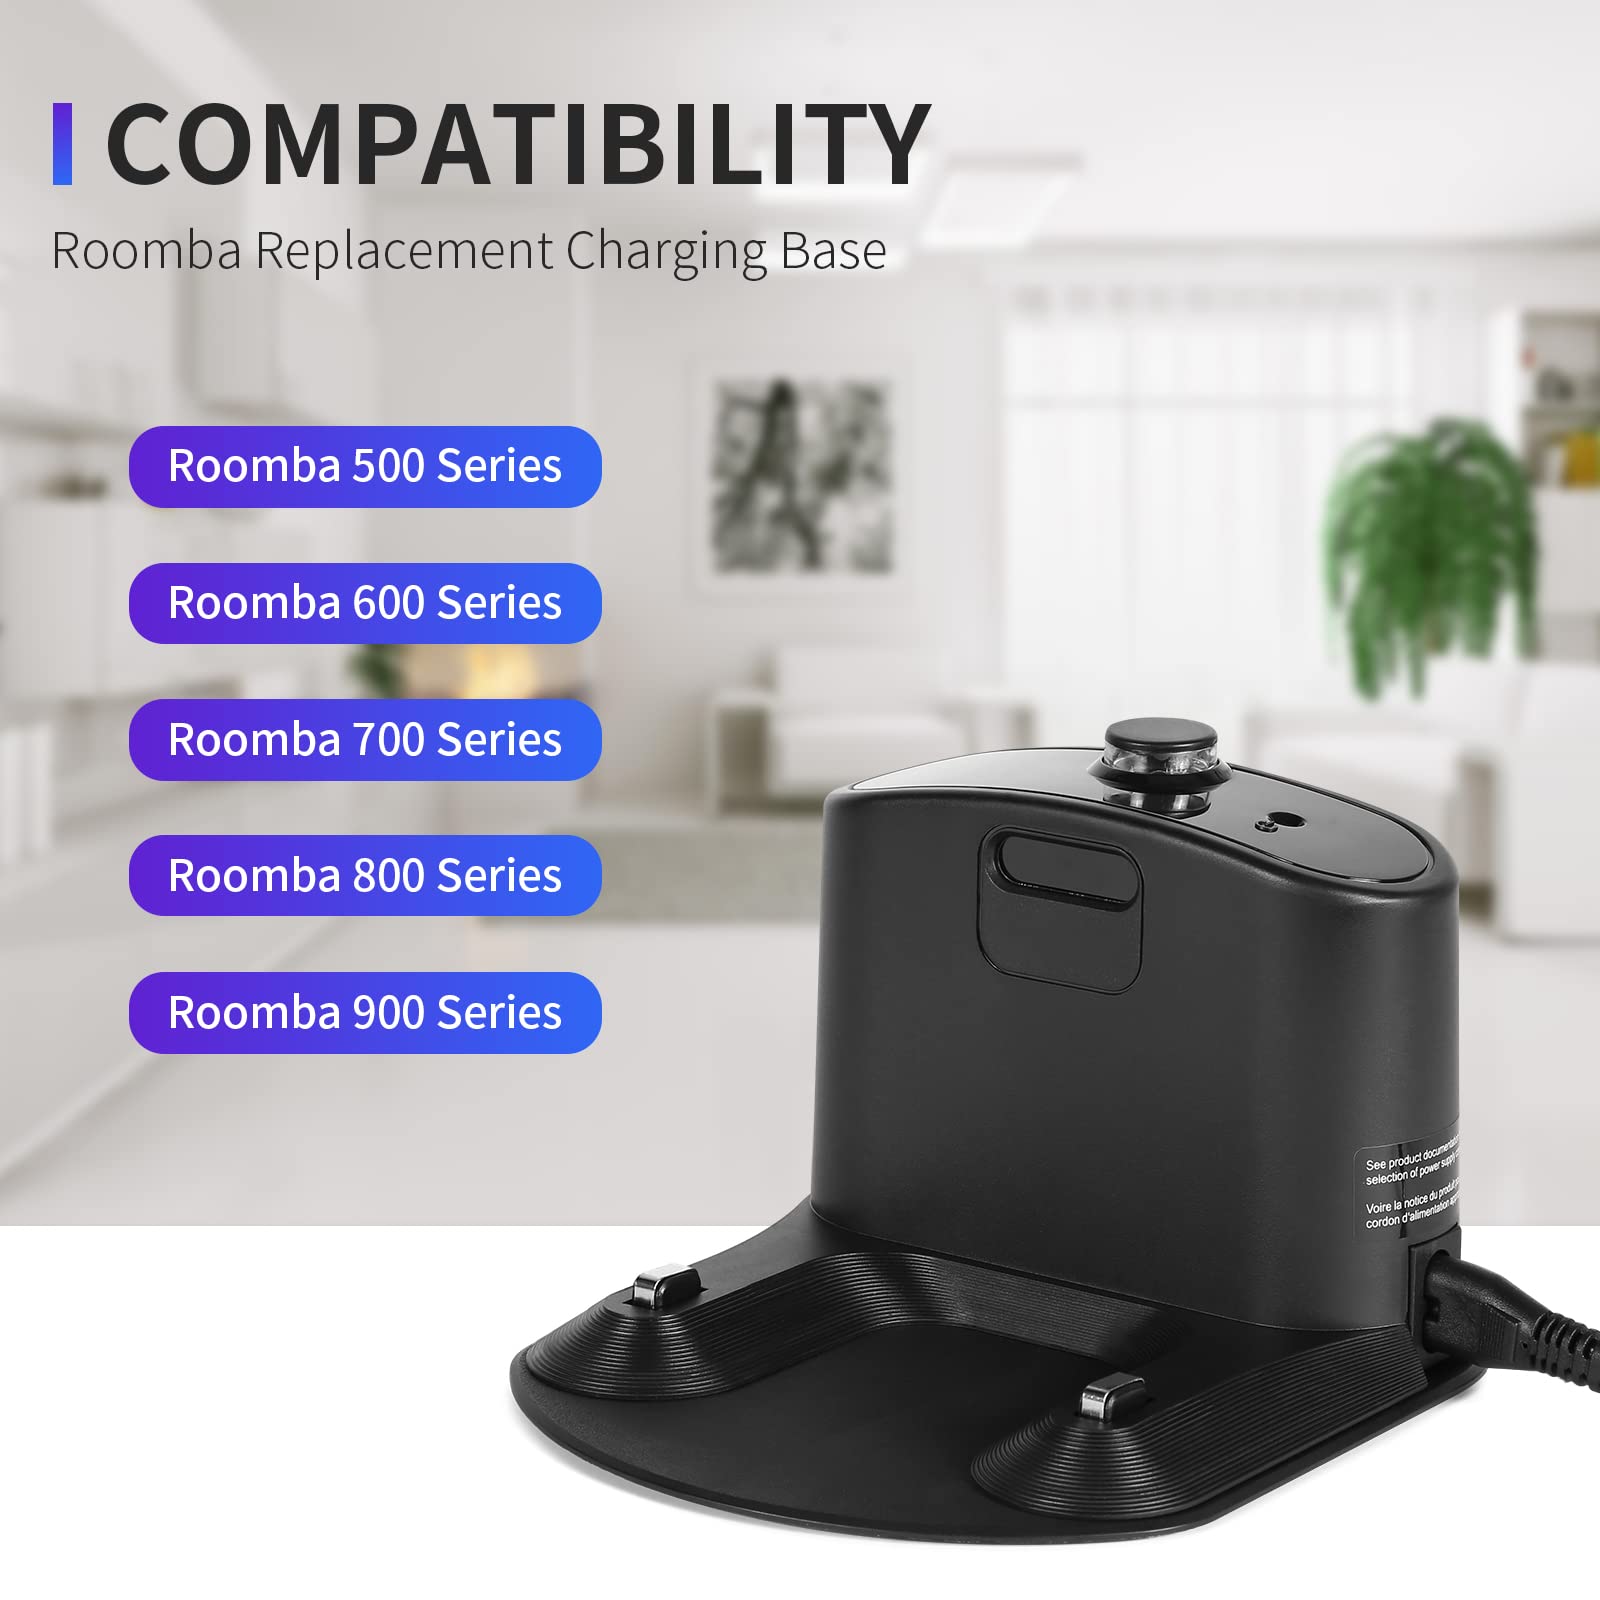 Roomba Charger Dock, Roomba Charging Base, Replacement Roomba Docking Station for Roomba e5 e6 i1 i3 i4 i6 i7 i8 500 600 700 800 900 Series -Charger ADF-N1 17170 17064, 4452369